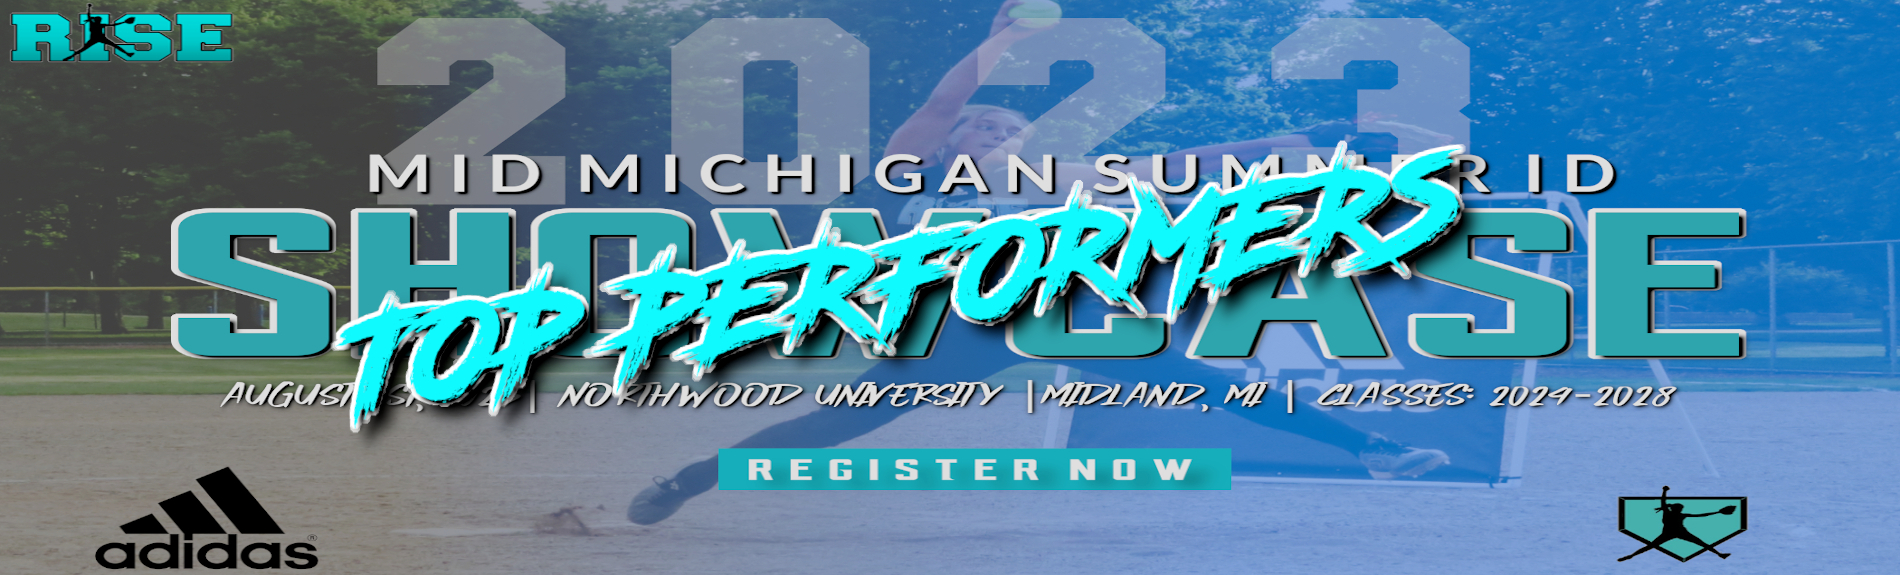 Mid Michigan Summer ID Showcase “TOP PERFORMERS”